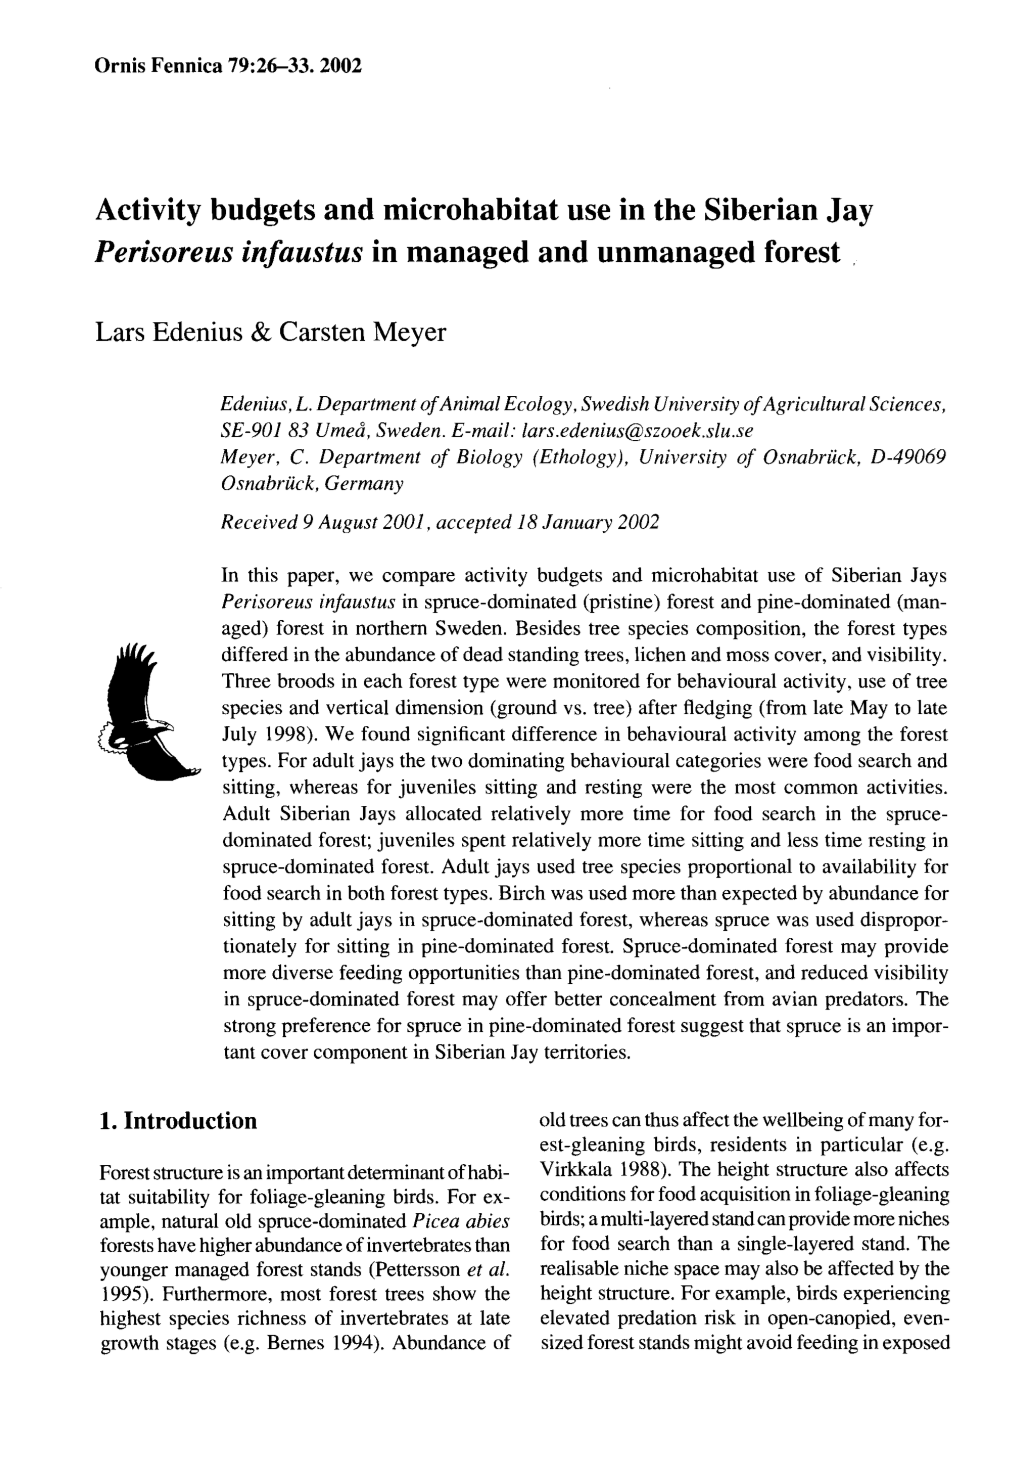 Activity Budgets and Microhabitat Use in the Siberian Jay Perisoreus Infaustus in Managed and Unmanaged Forest